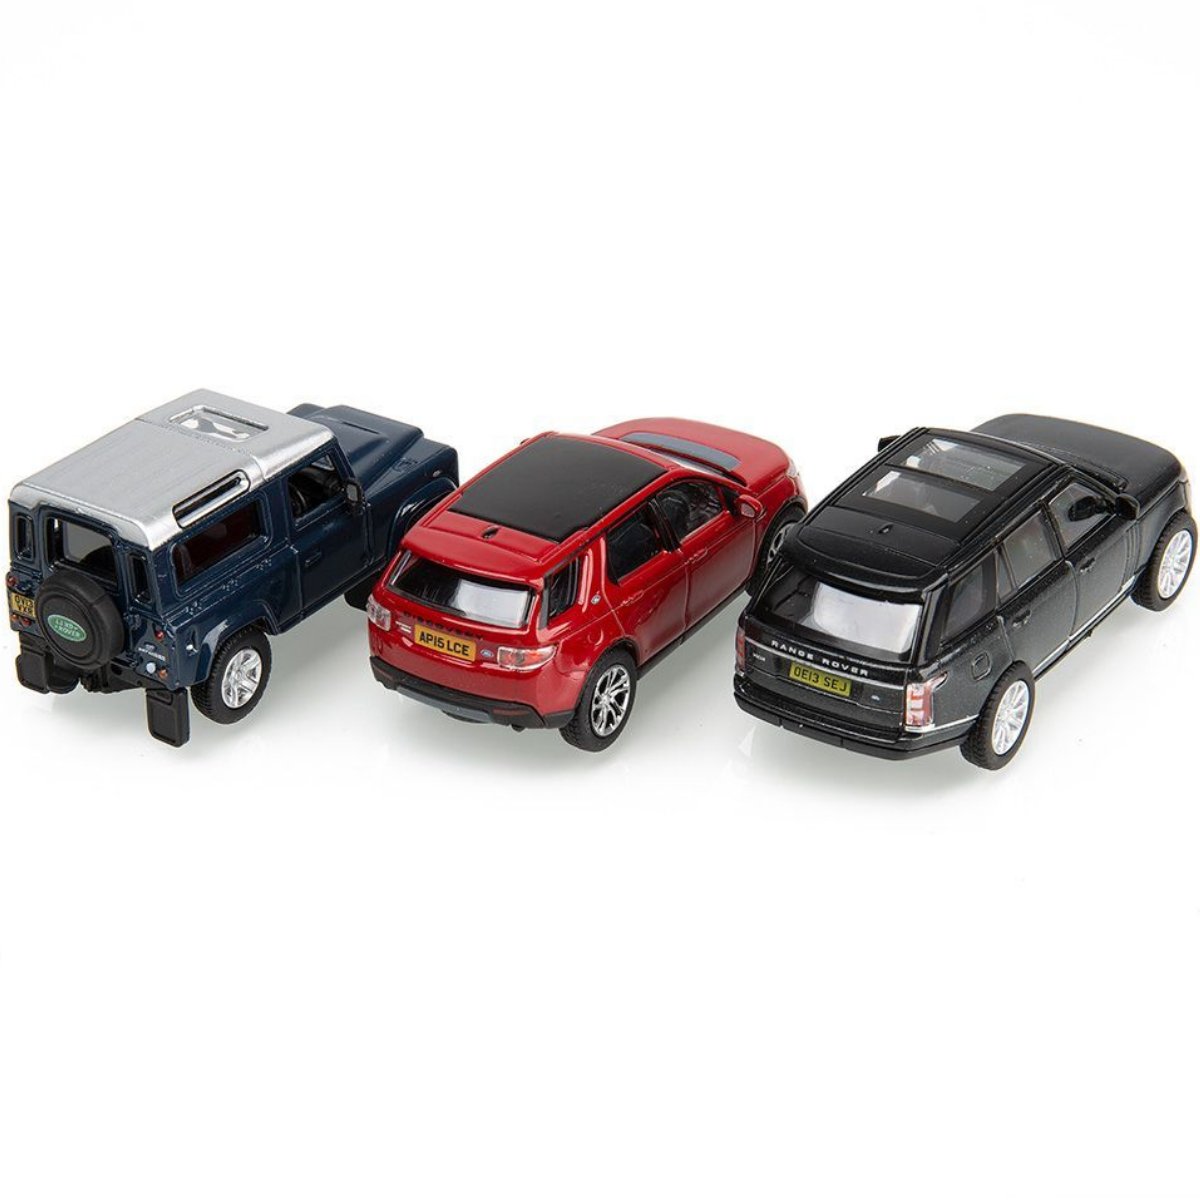 Oxford Diecast SP136 Land Rover 70th Anniversary Set - Phillips Hobbies